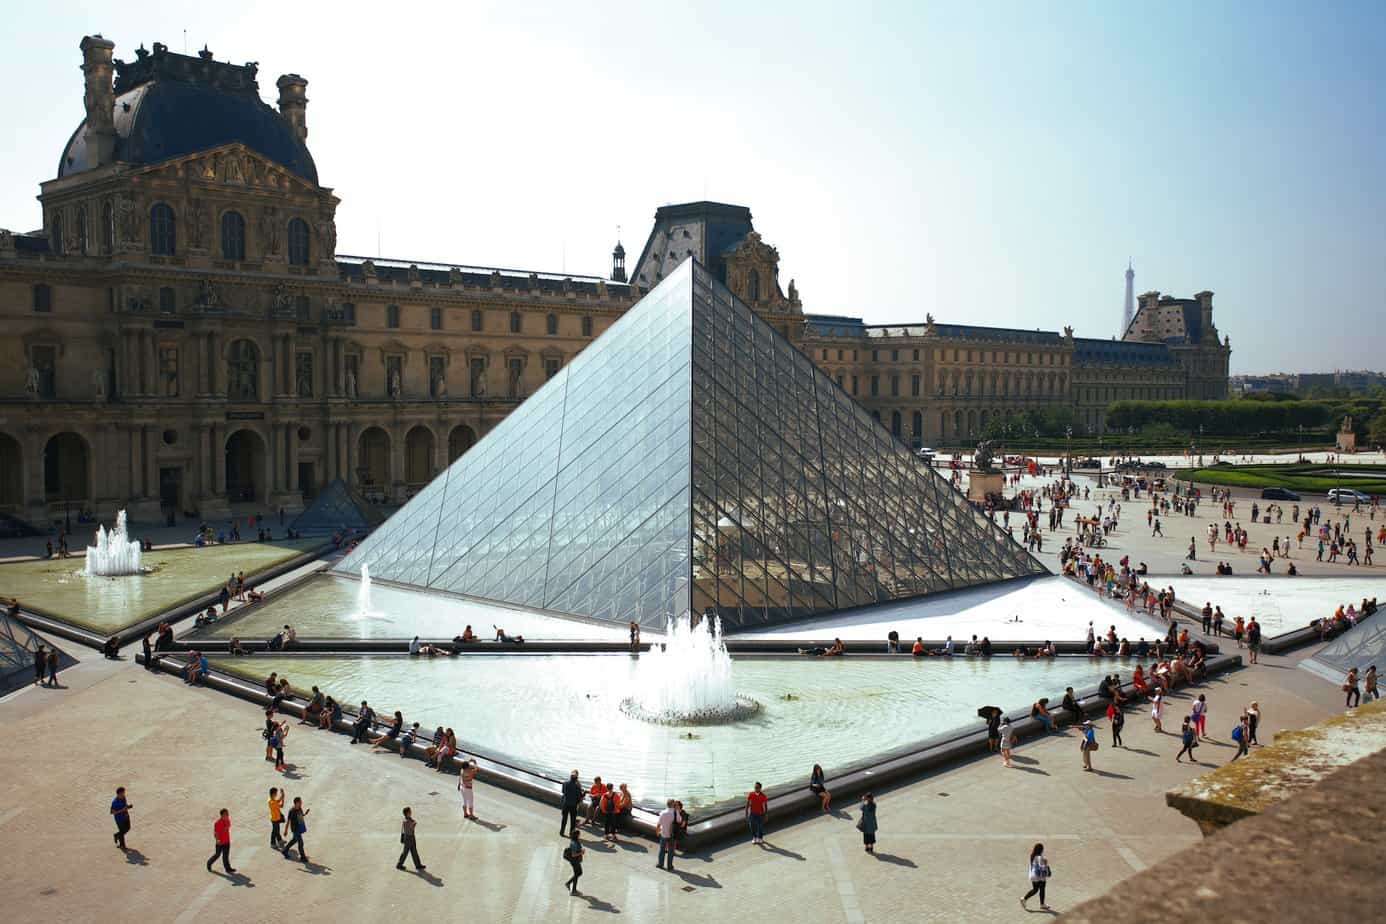 What to know before you visit the Louvre